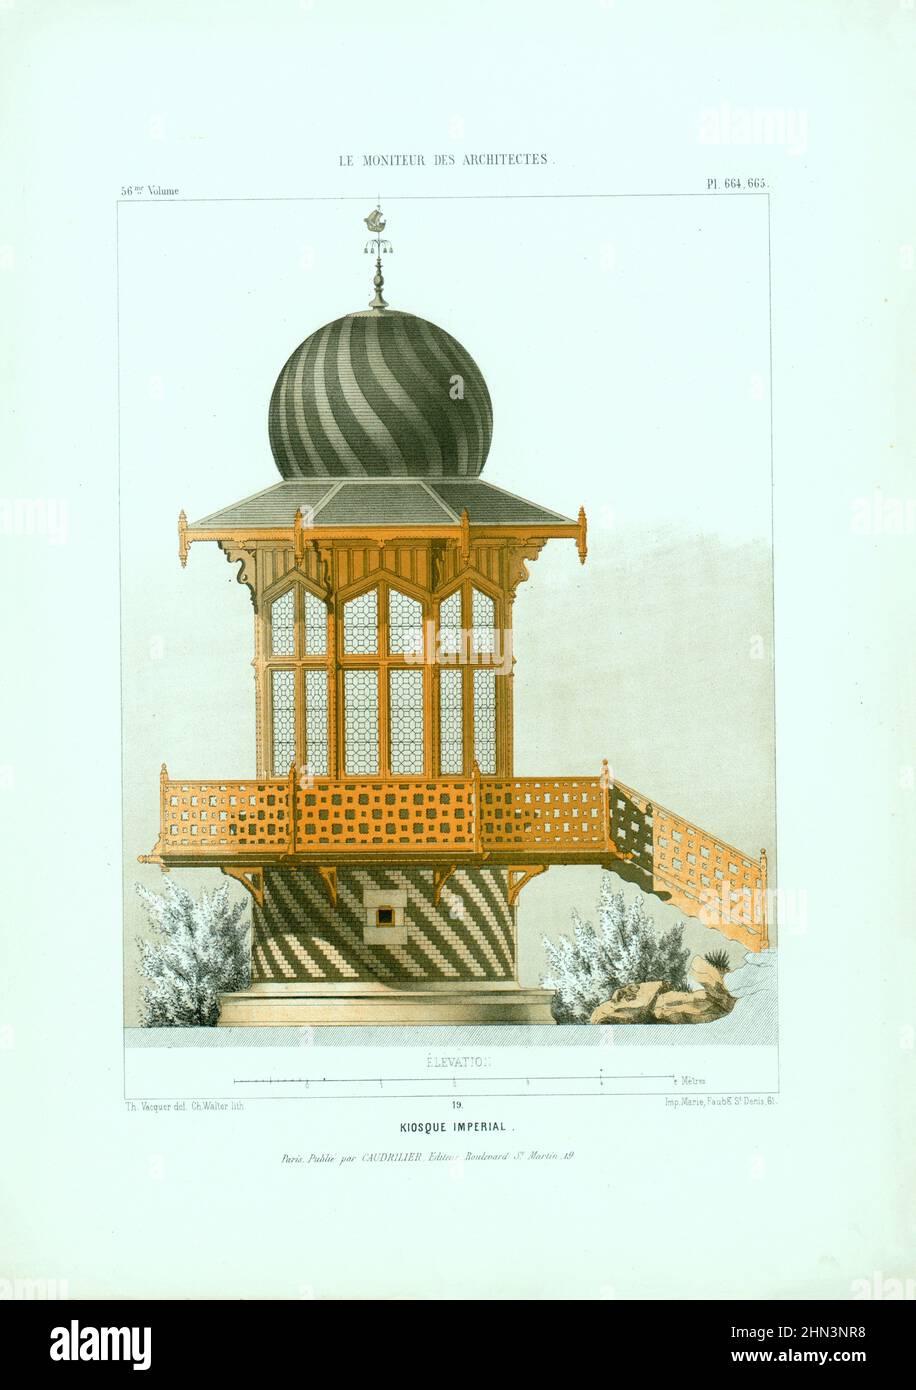 Vintage lithograph of Imperial kiosk at the Bois de Boulogne in Paris The Bois de Boulogne architectural: collection of embellishments executed in its Stock Photo